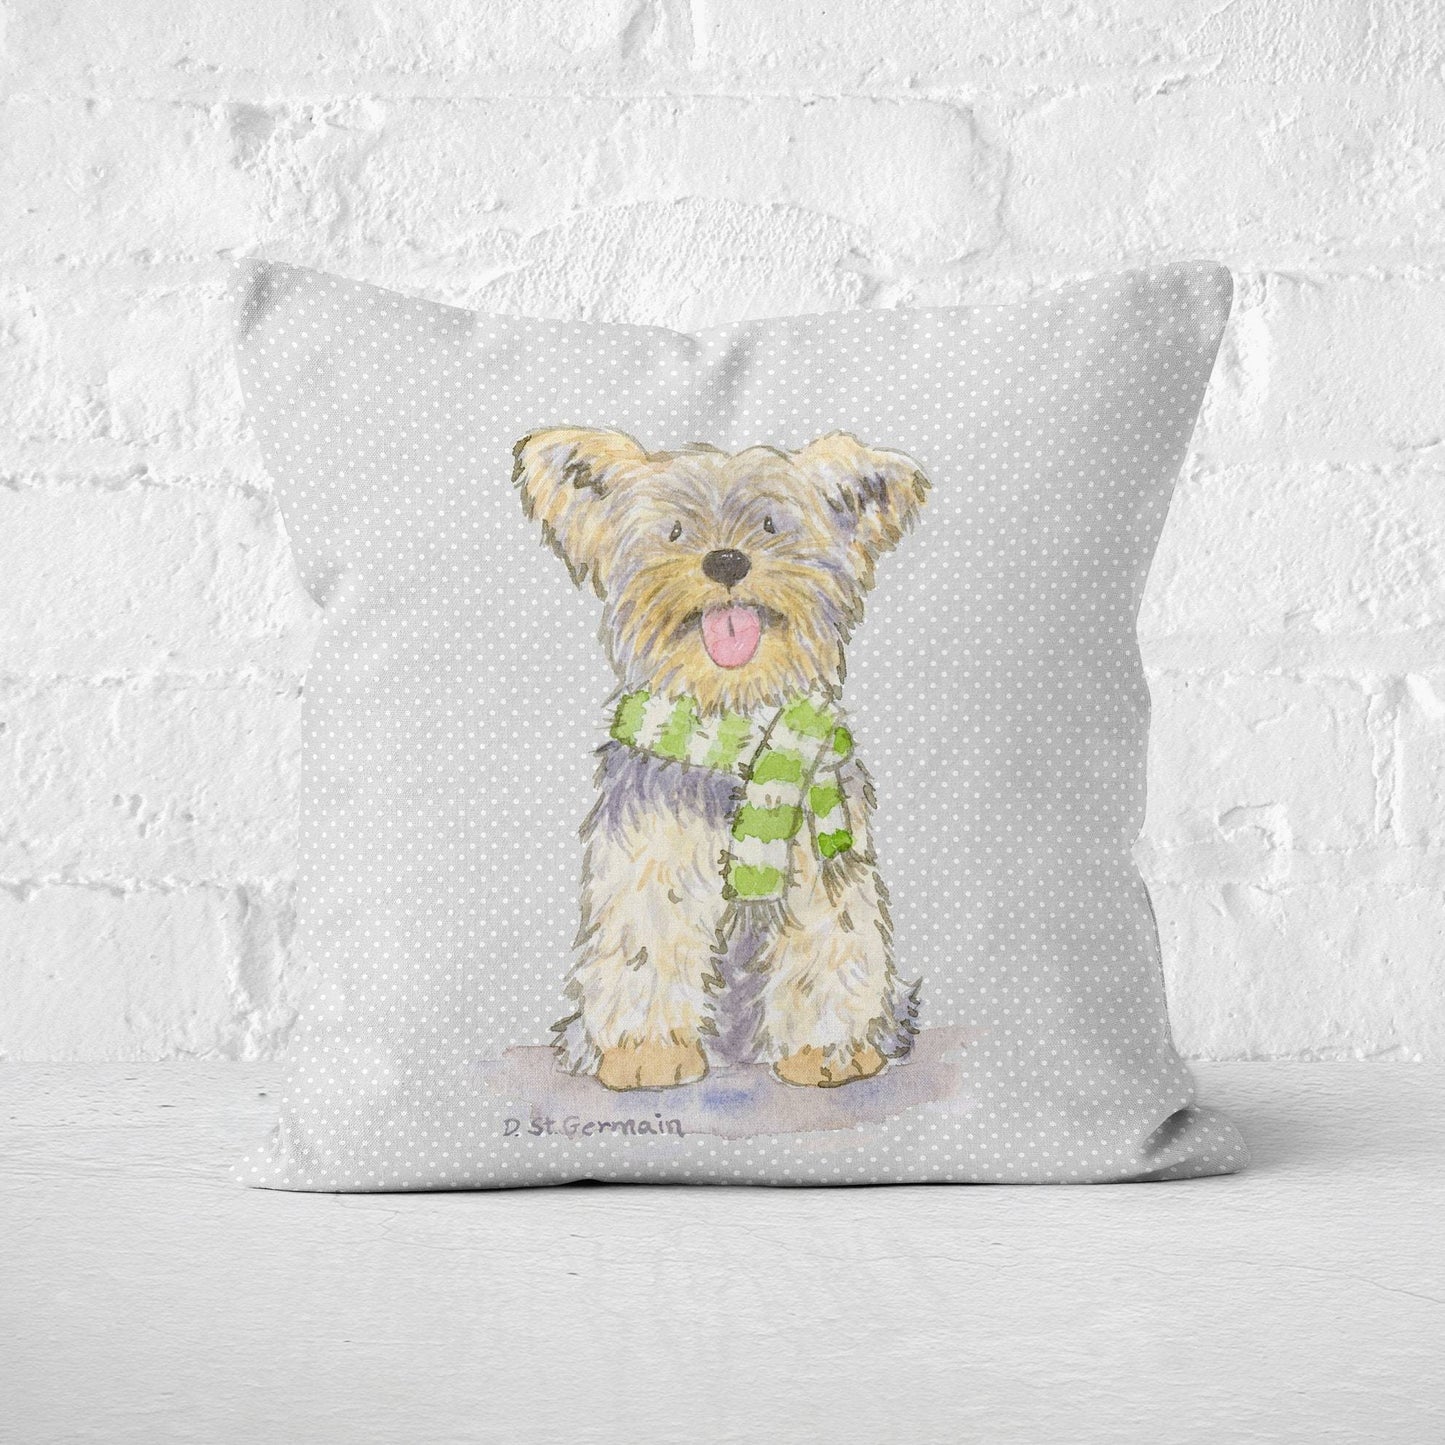 Yorkie Holiday Pillow Cover, Yorkie Gift, Yorkshire Terrier Pillow Cover, Yorkie Lover, Yorkie Gift, Dog Lover Gift, Christmas Throw Pillow